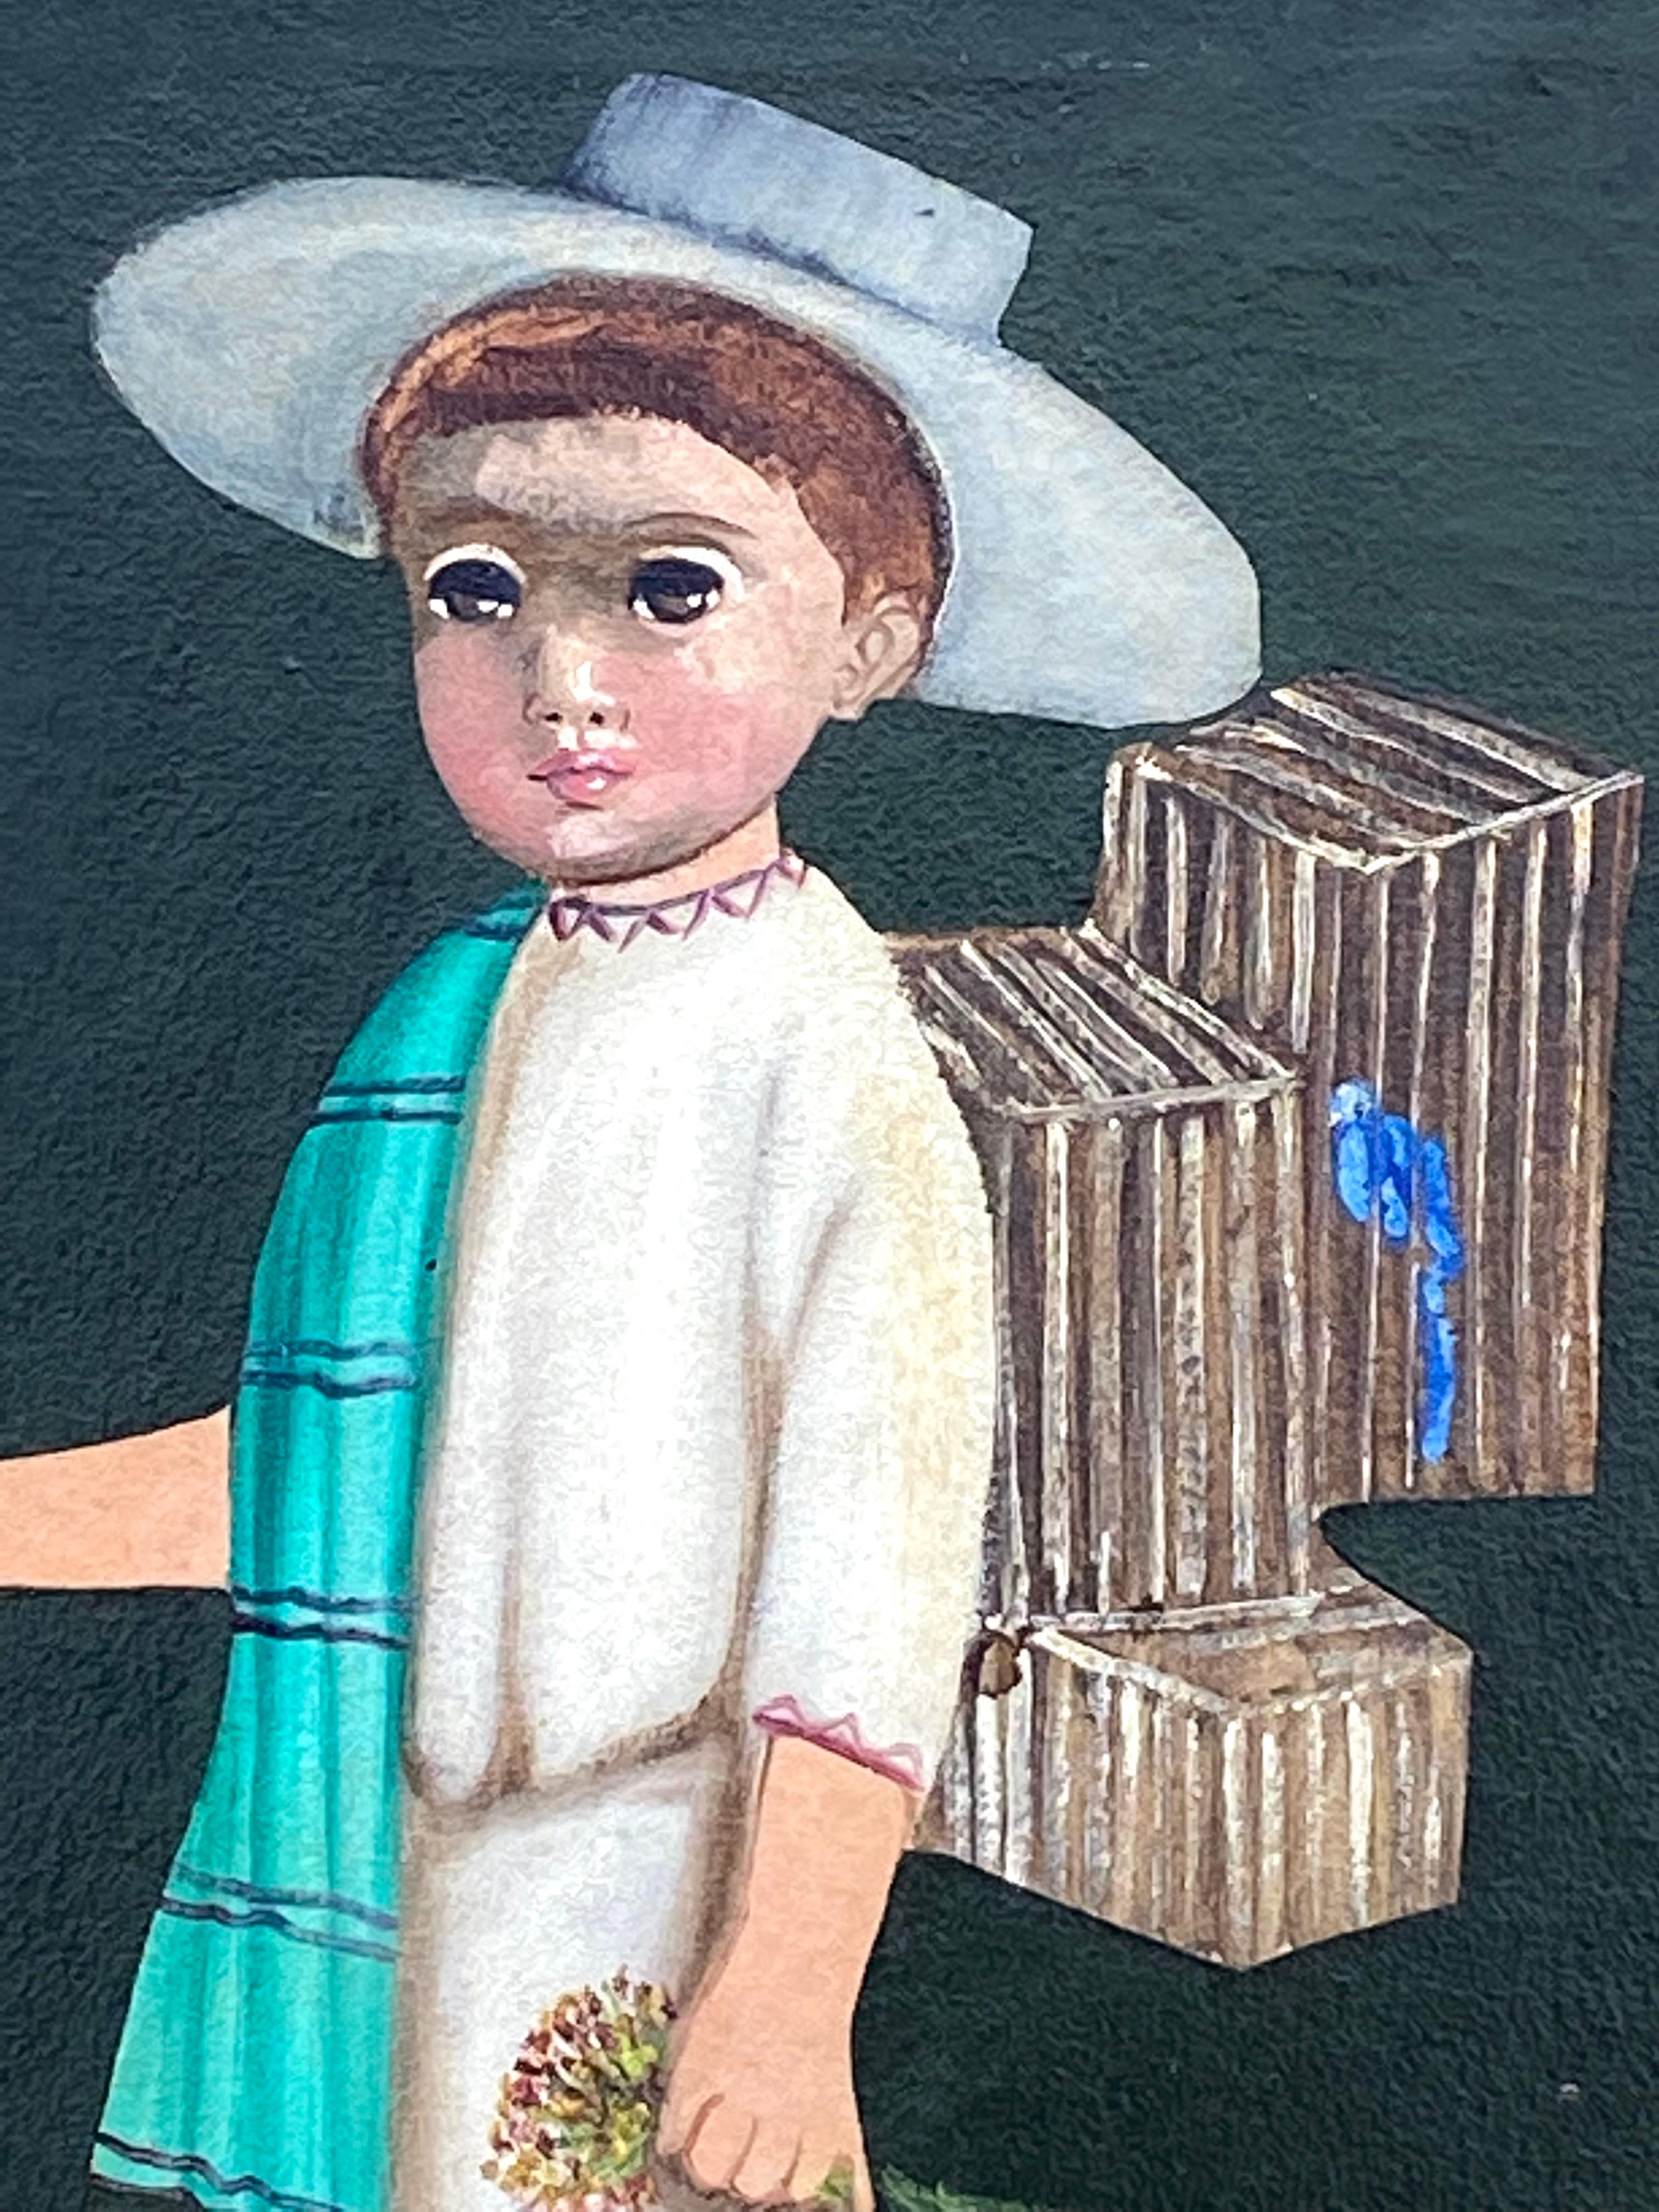 “Boy with Blue Birds” - Painting by Agapito Labios